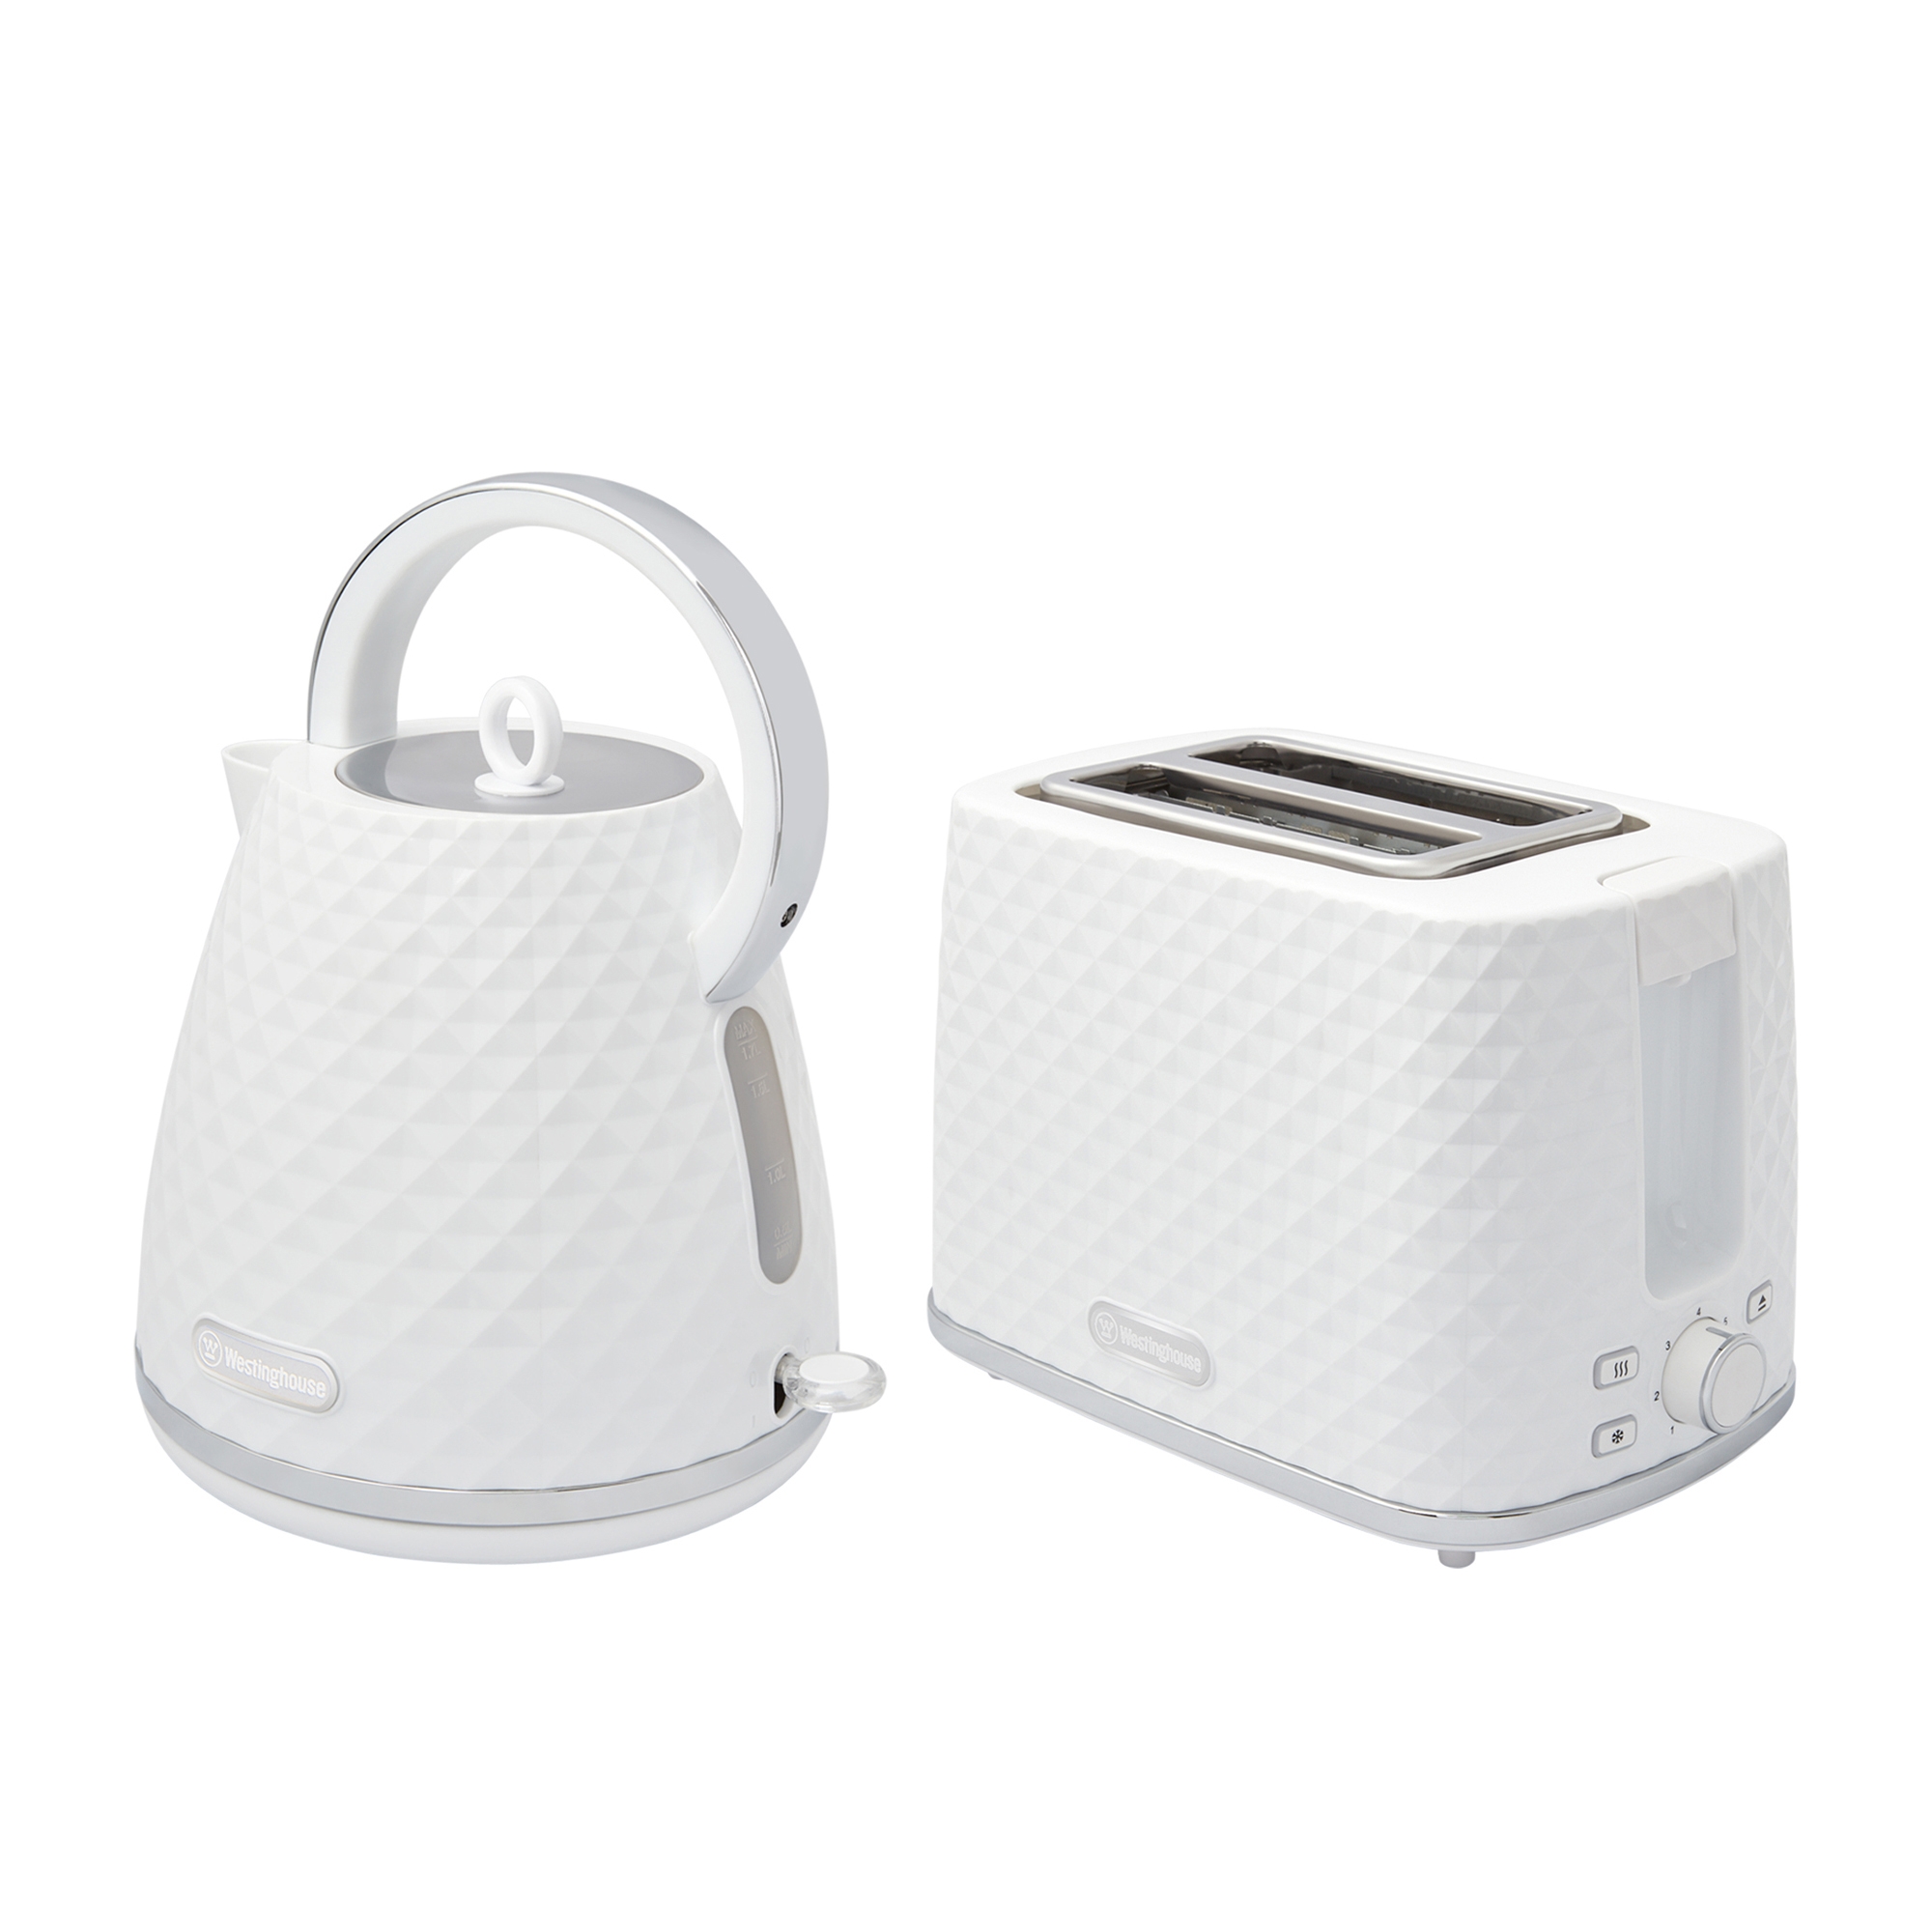 Westinghouse Kettle and Toaster Pack White - Diamond Pattern Image 2